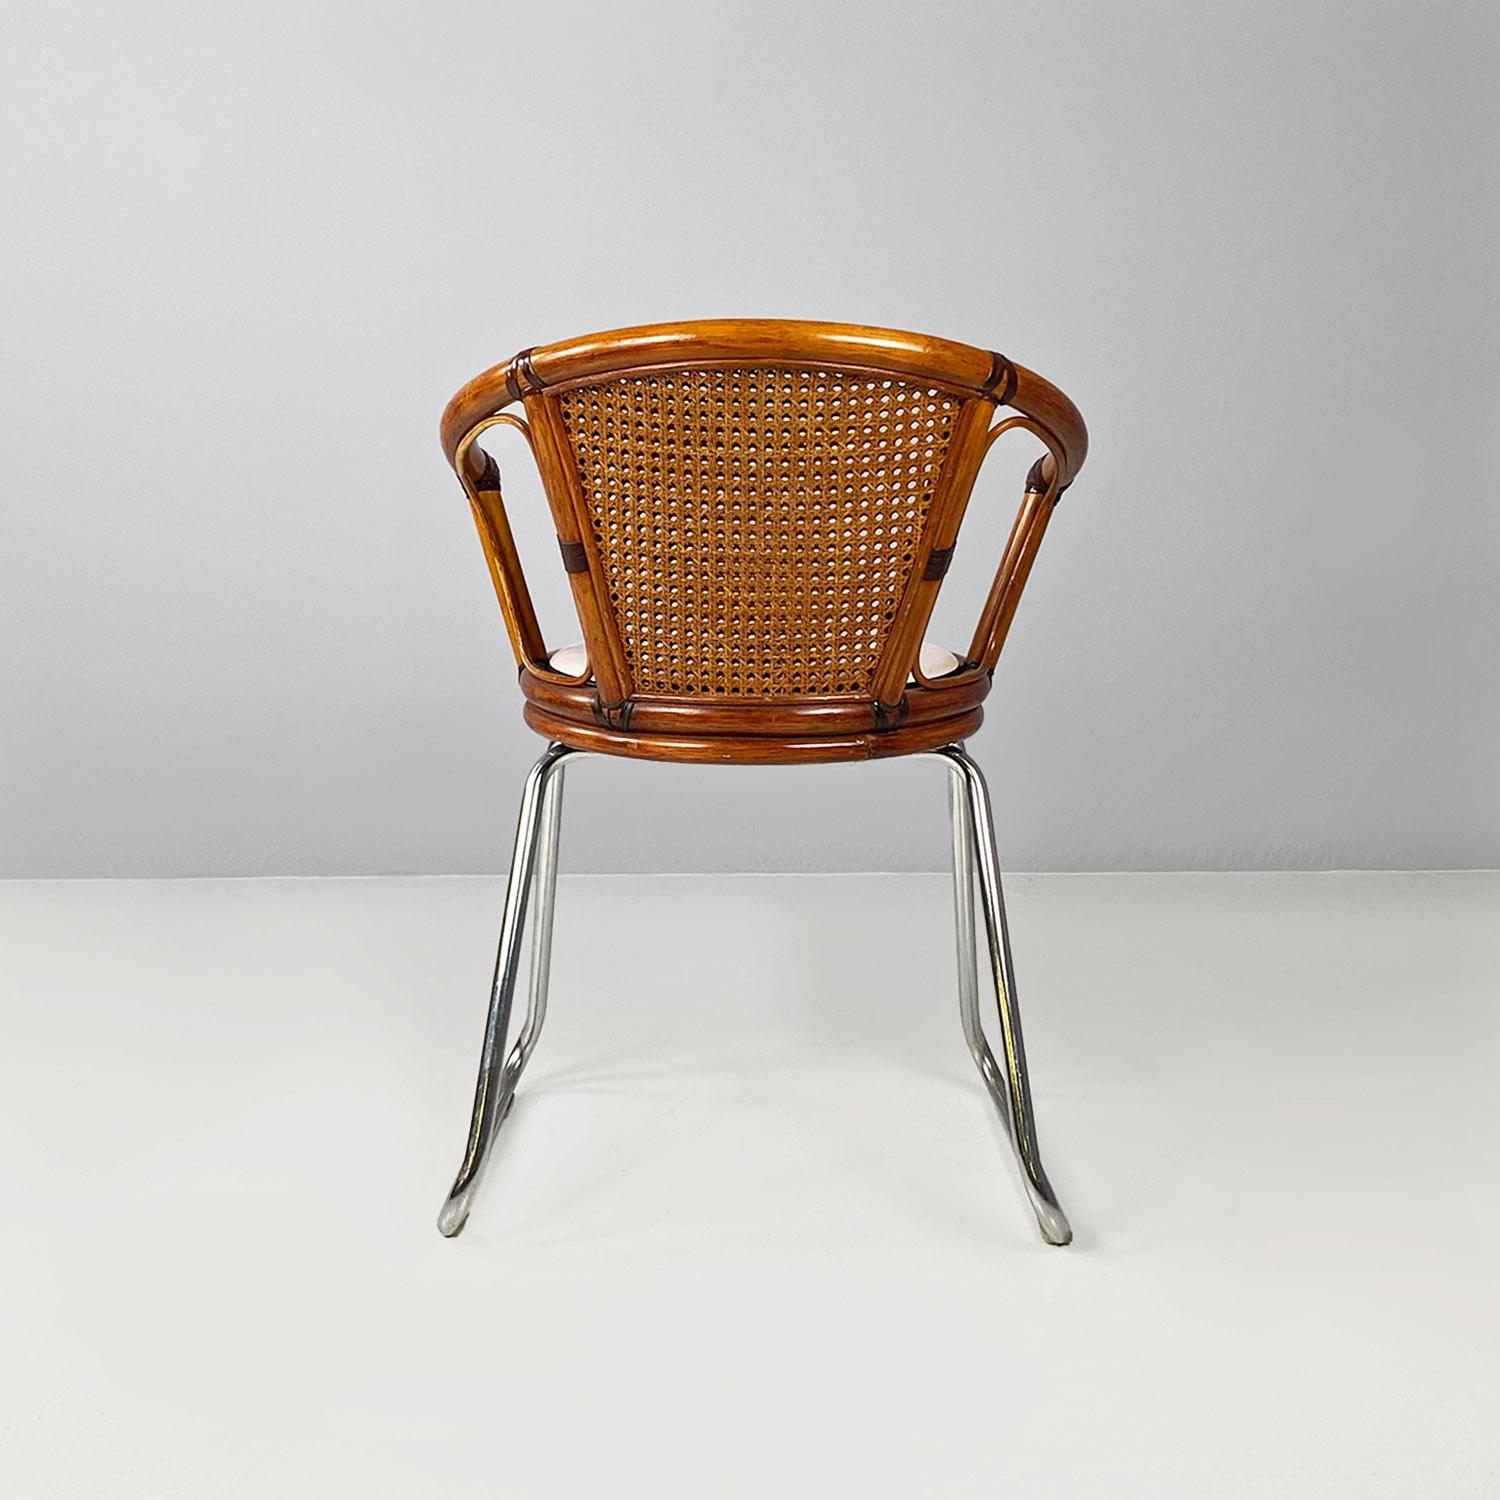 Cockpit chair, modern Italian, made of vienna straw wood and steel, ca 1970s For Sale 1